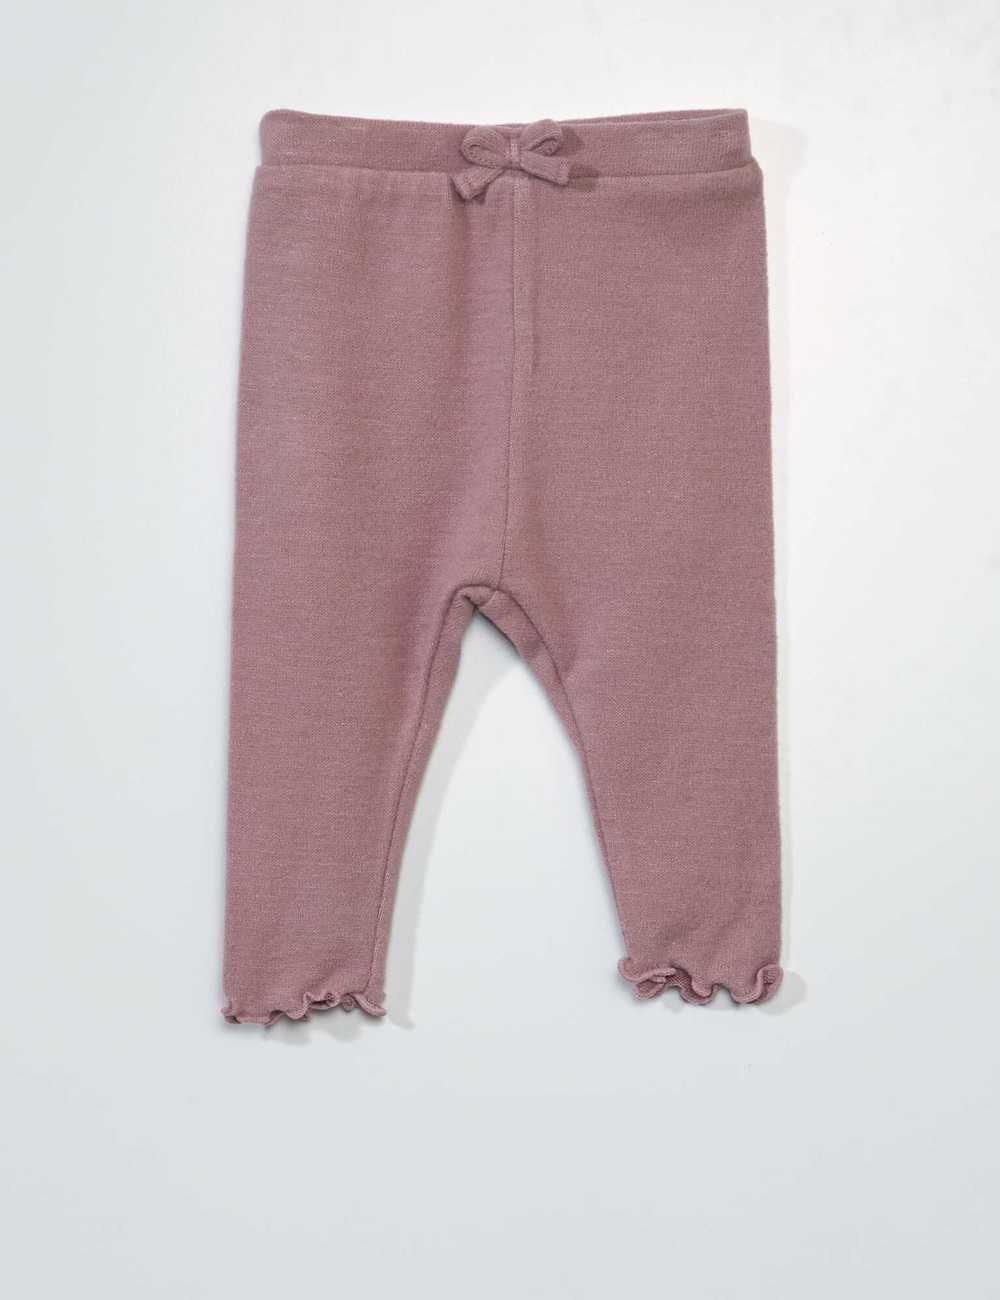 Buy Soft knit leggings and sweater - 2-piece set Online in Dubai & the  UAE